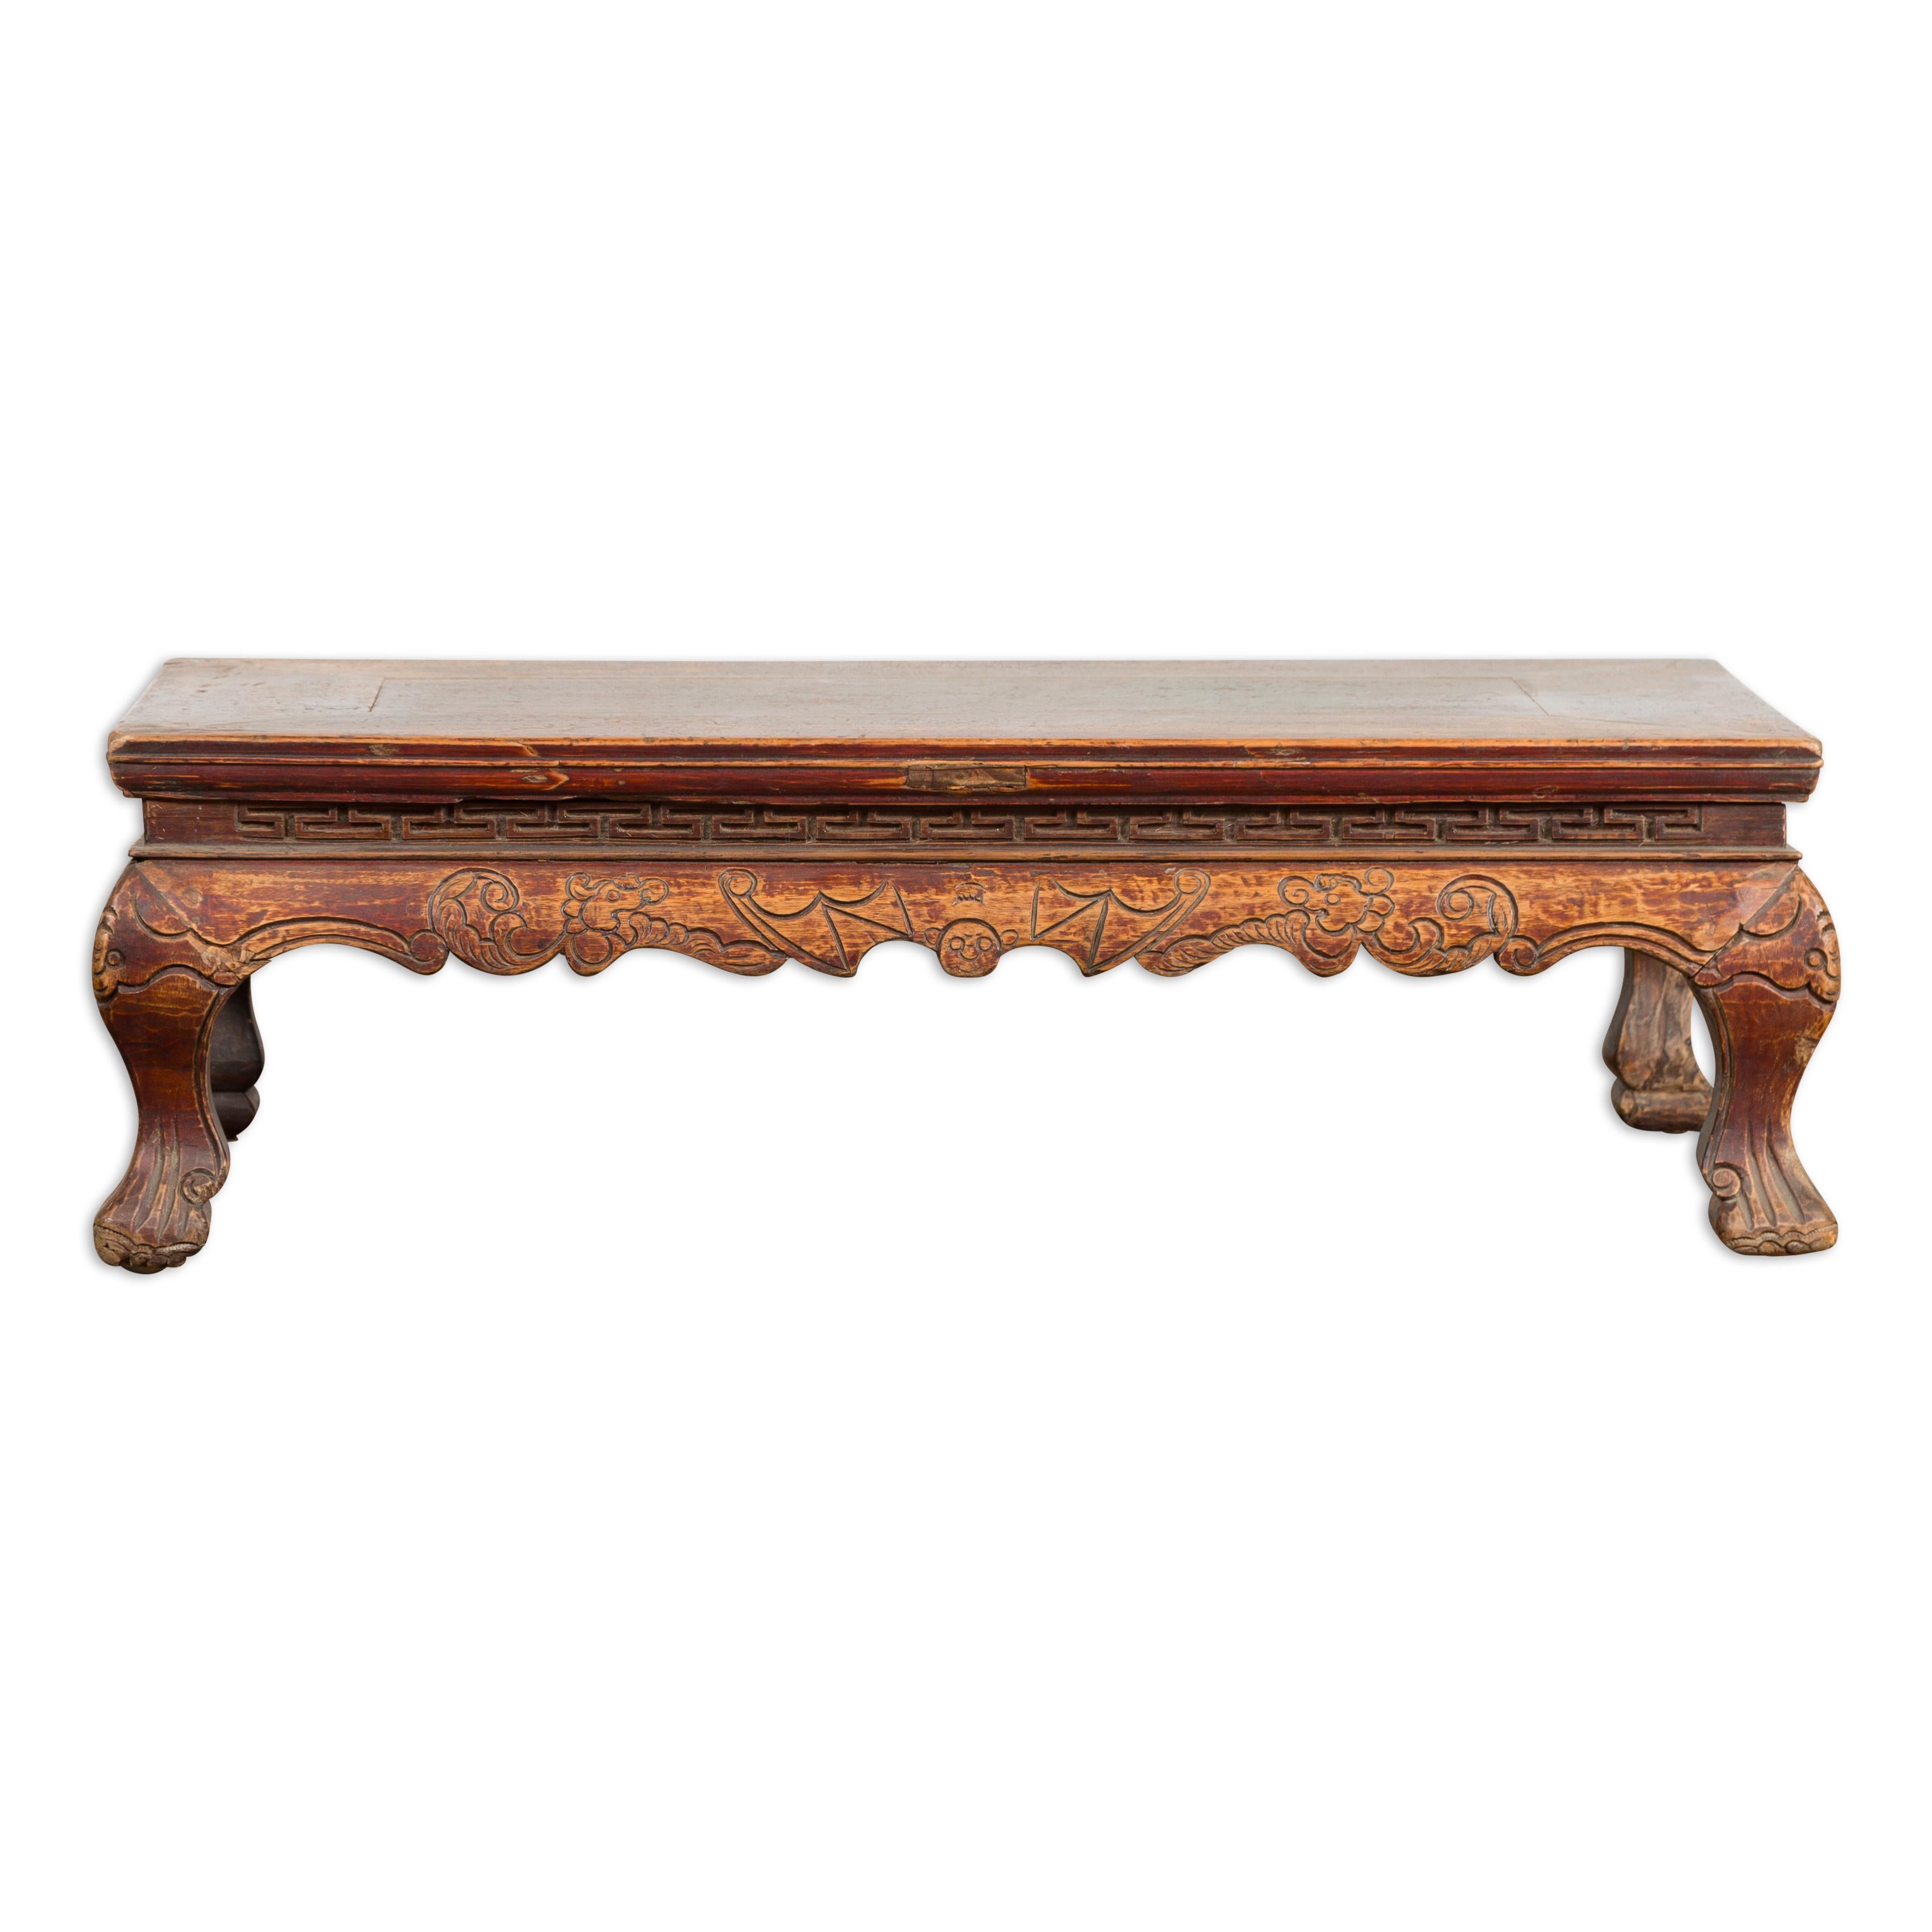 Chinese Qing Dynasty Period Low Kang Table with Carved Bats and Cabriole Legs For Sale 10